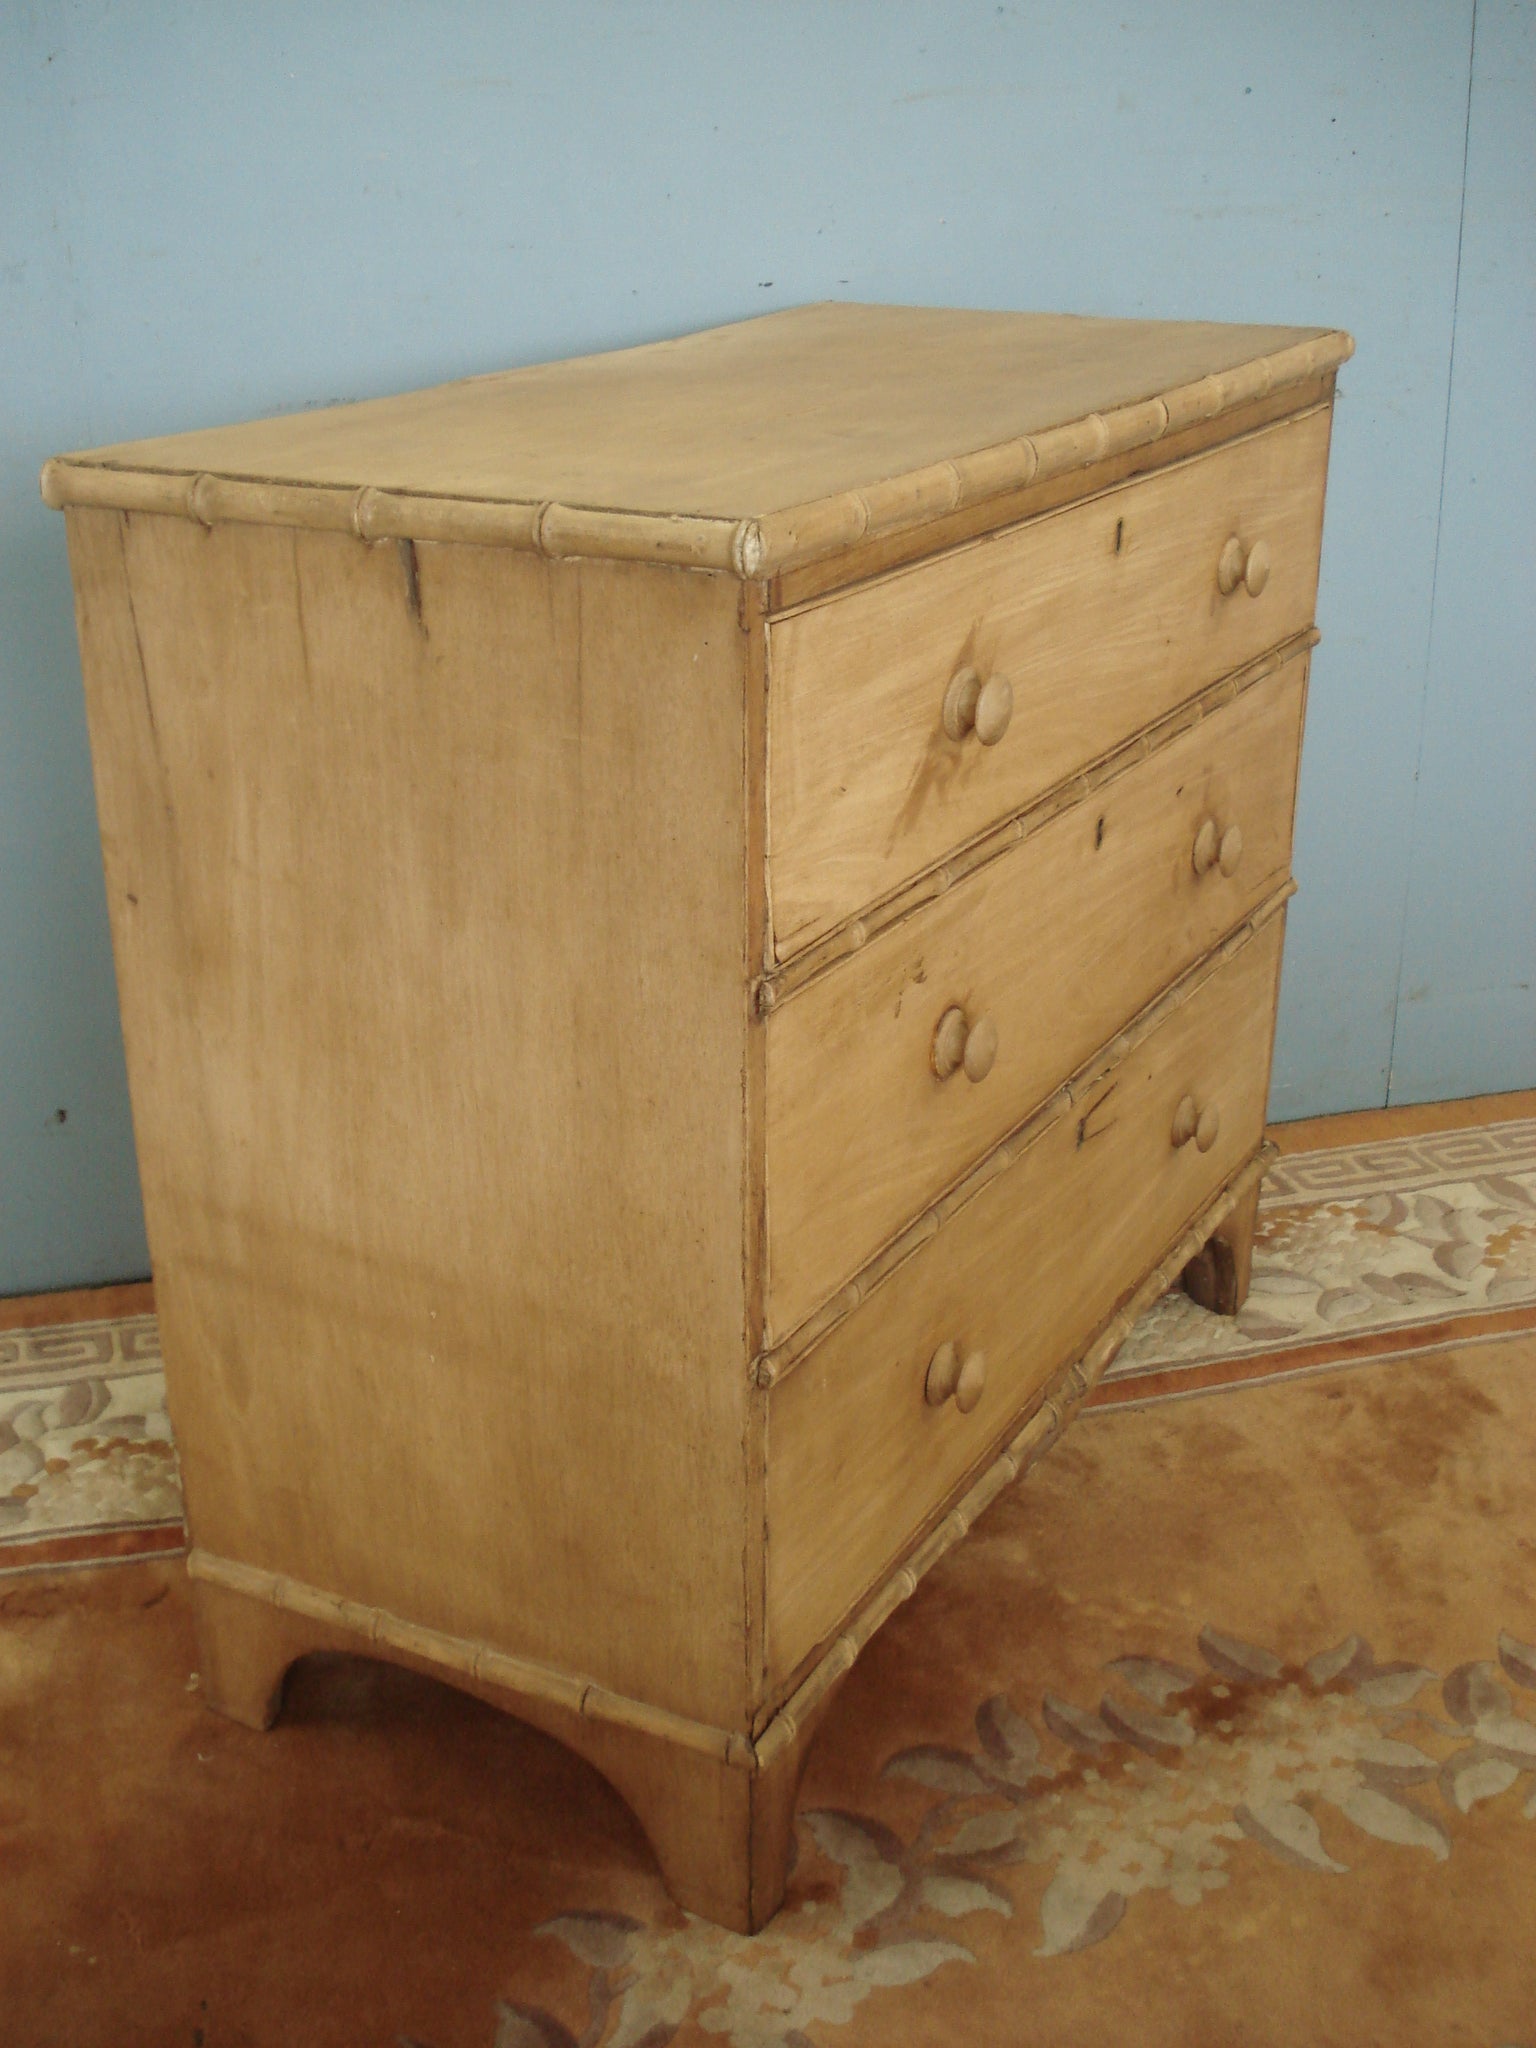 Regency Three Drawer Chest with simulated bamboo decoration